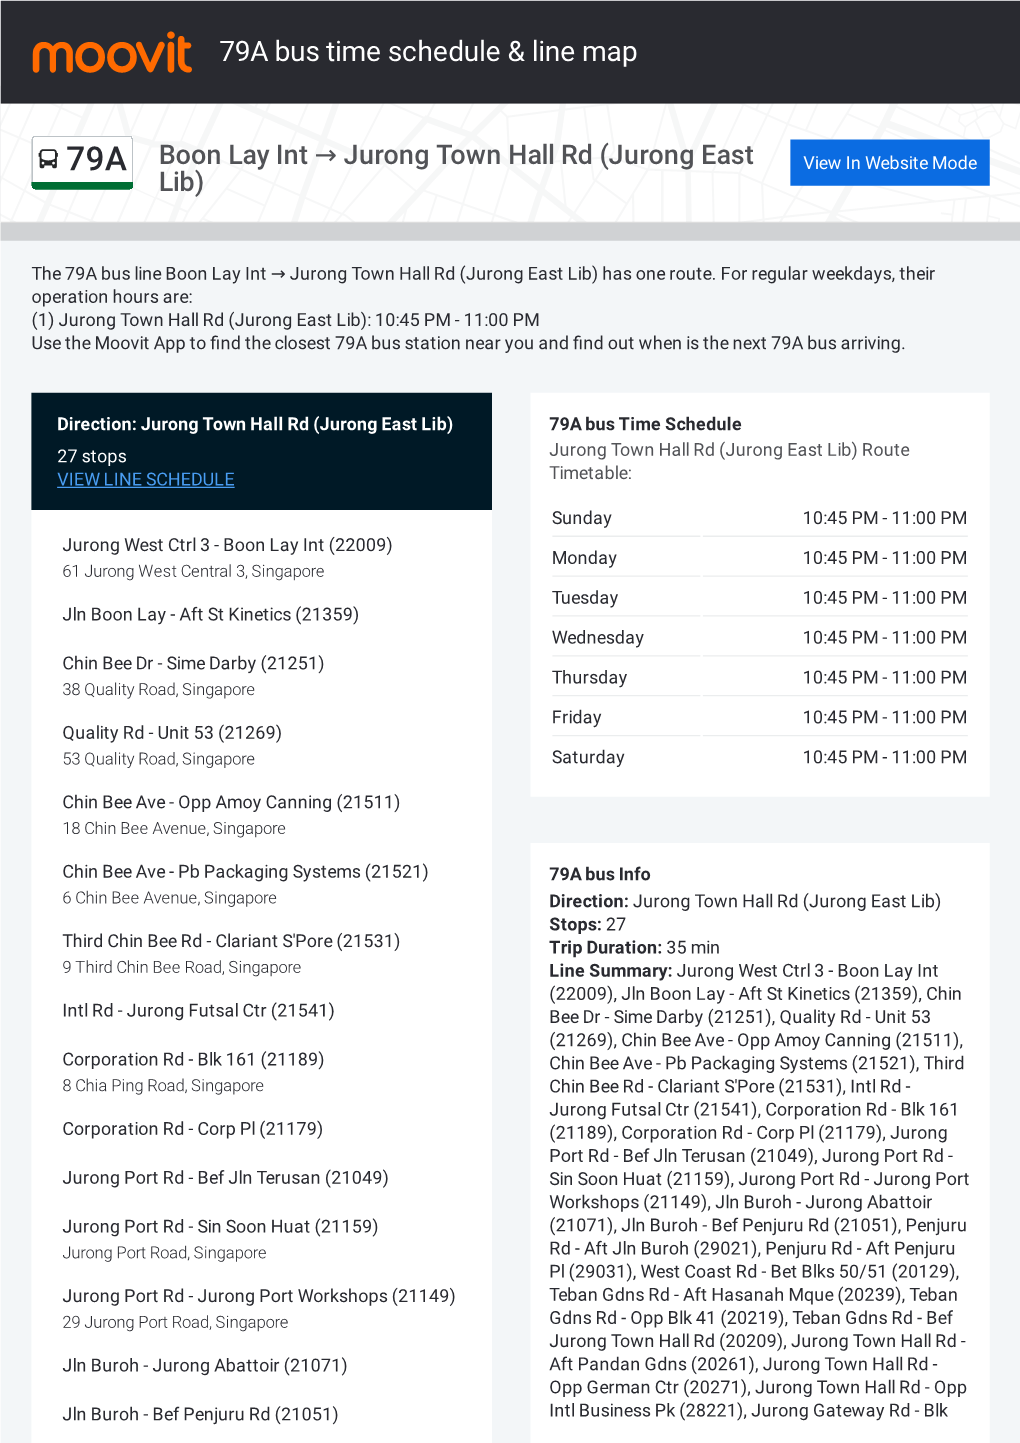 79A Bus Time Schedule & Line Route